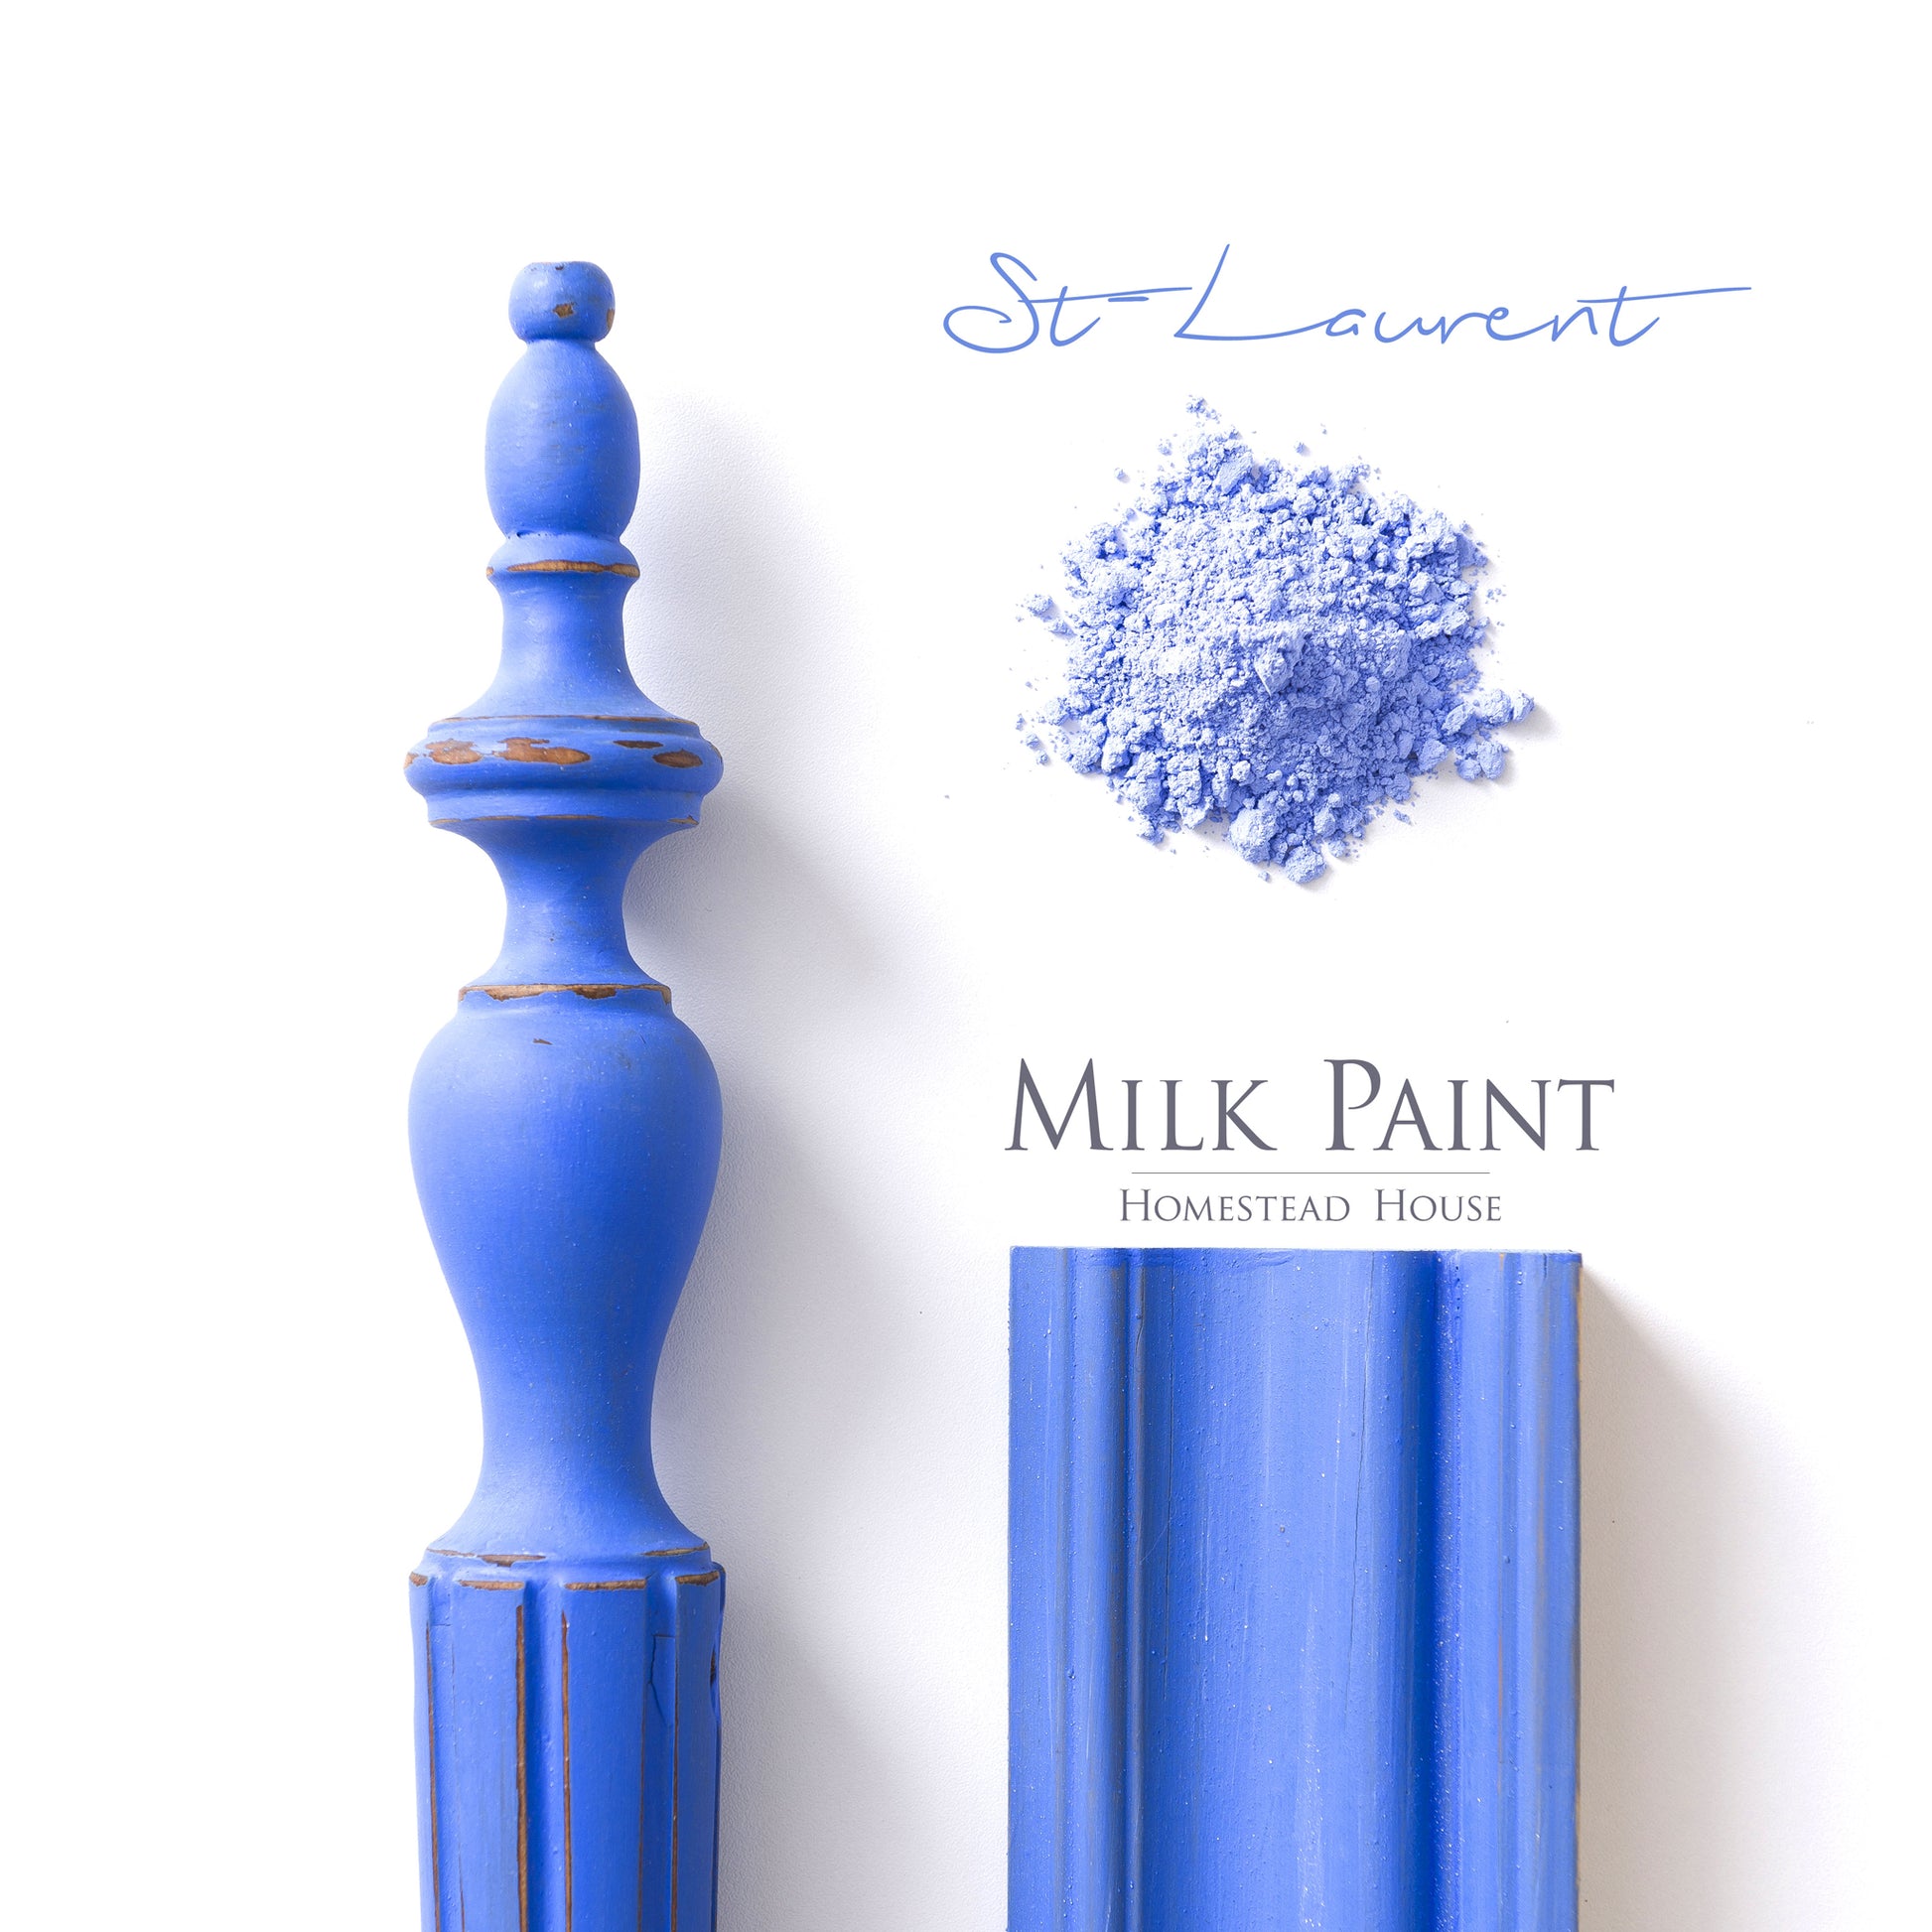 Milk Paint from Homestead House in St-Laurent, A mid-tone Blue with a hint of lavender. | homesteadhouse.ca